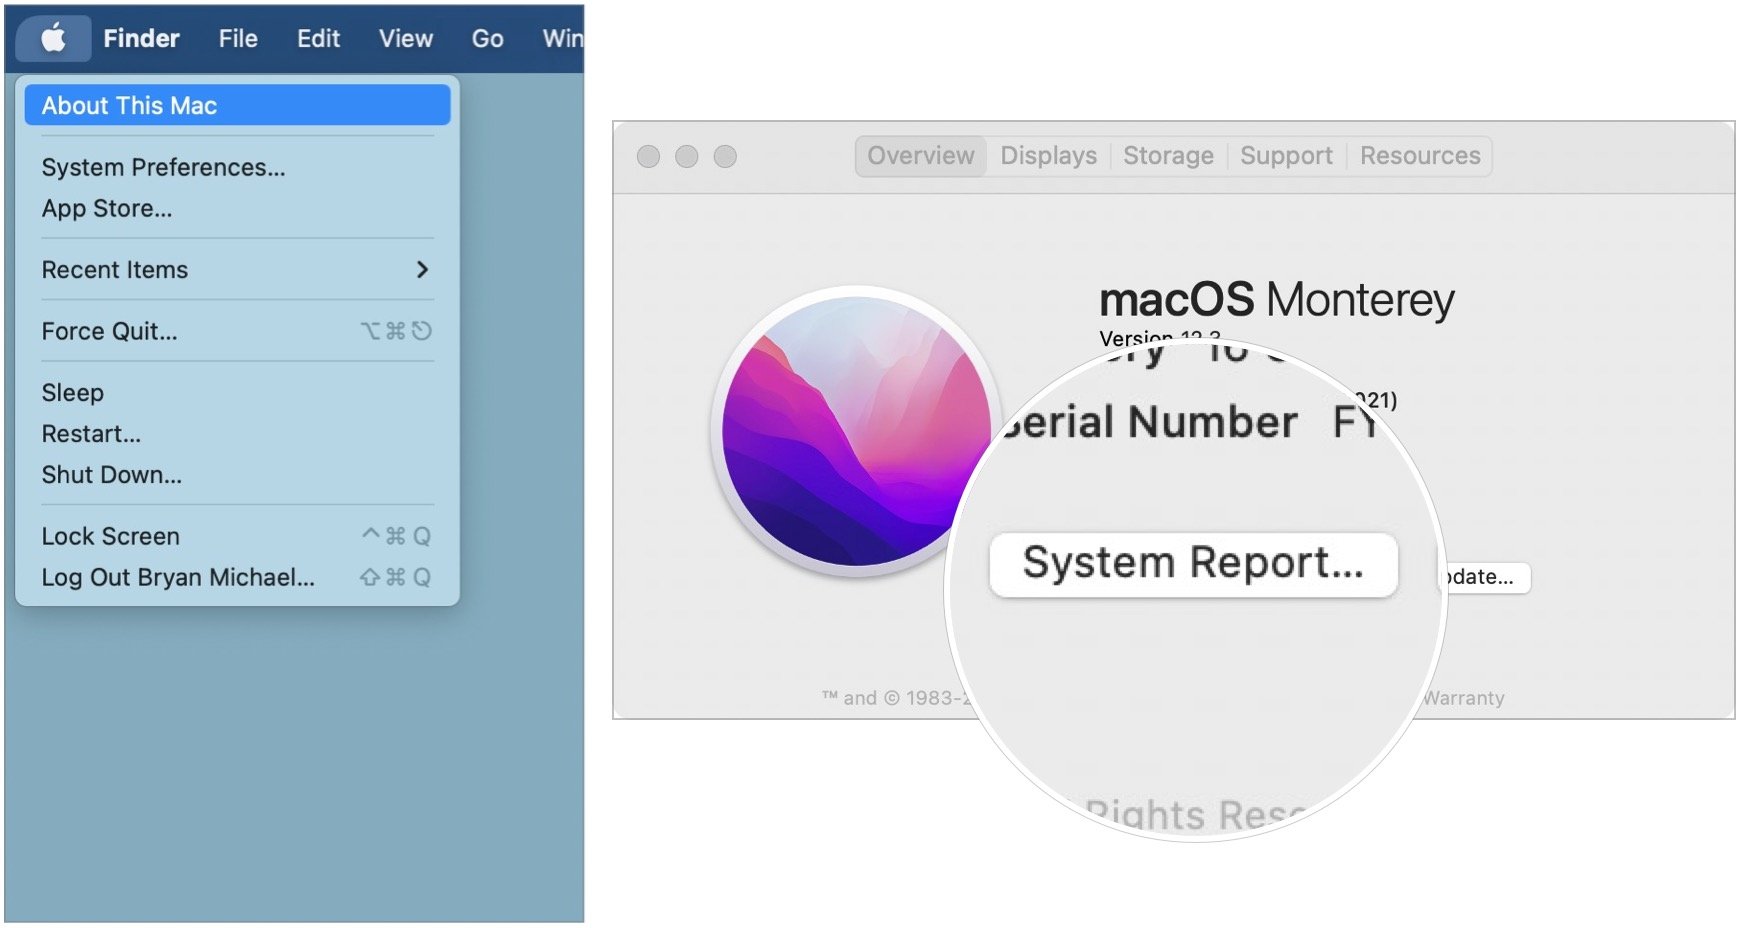 To see which version of apps your M1 Mac uses, click on the Apple icon at the top left on the menu bar. Then select About This Mac on the pull-down menu. Next, select System Report...